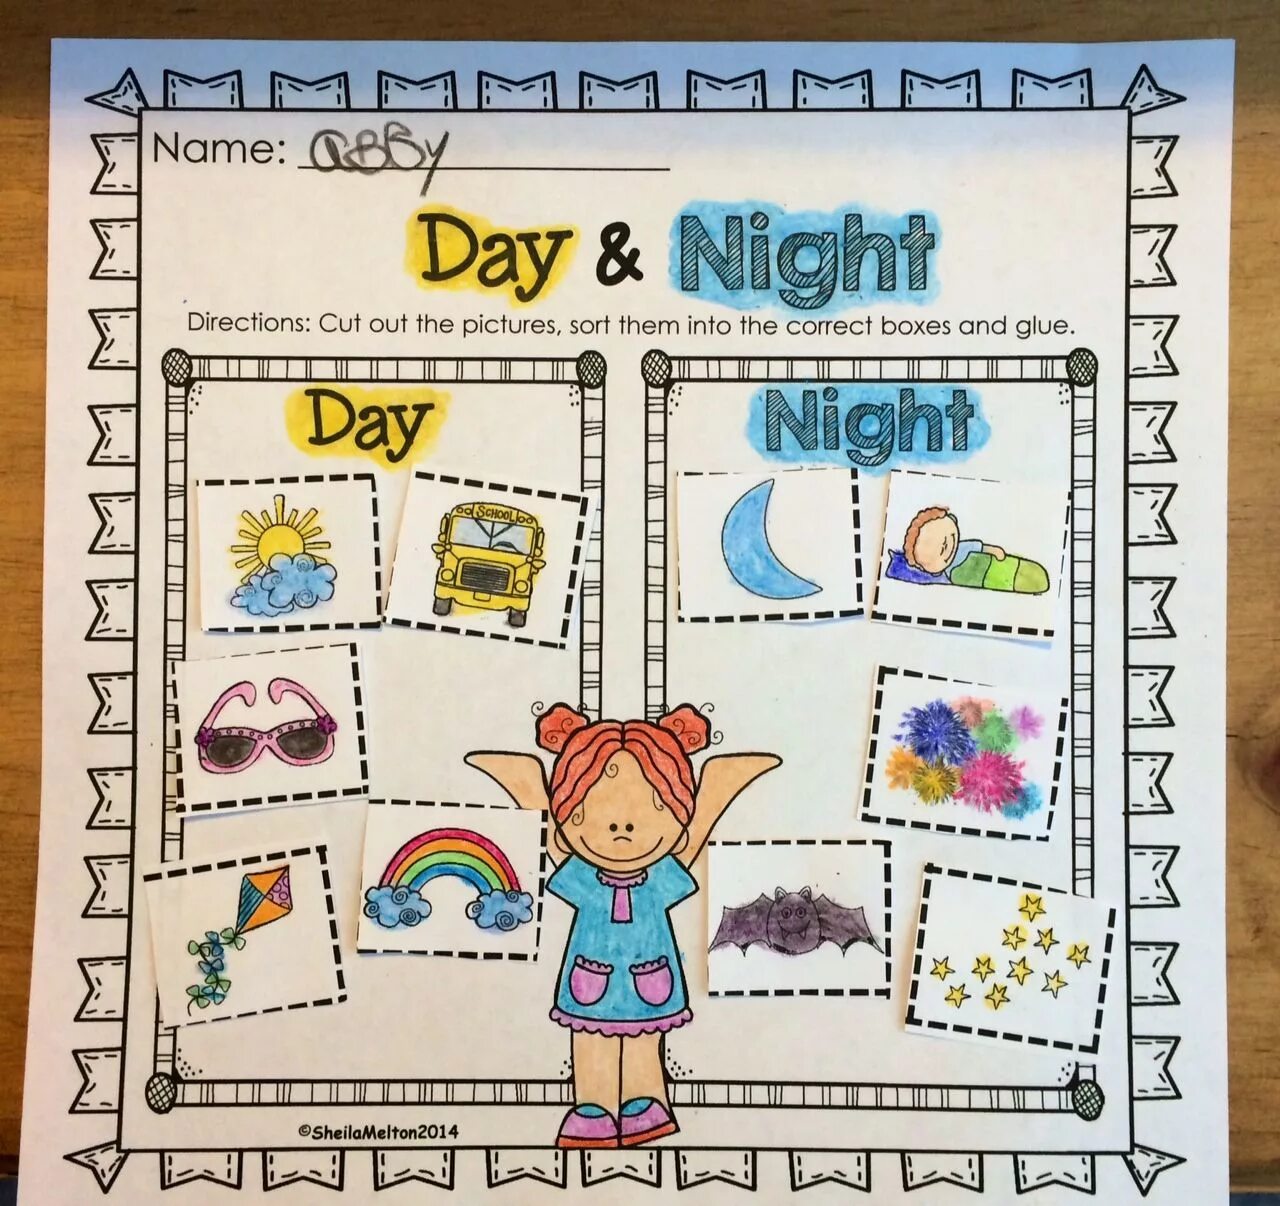 Lesson plans for kids. Day in Day out задания. Day Night Worksheet. Day and Night activity. Part of the Day for Kids задания.